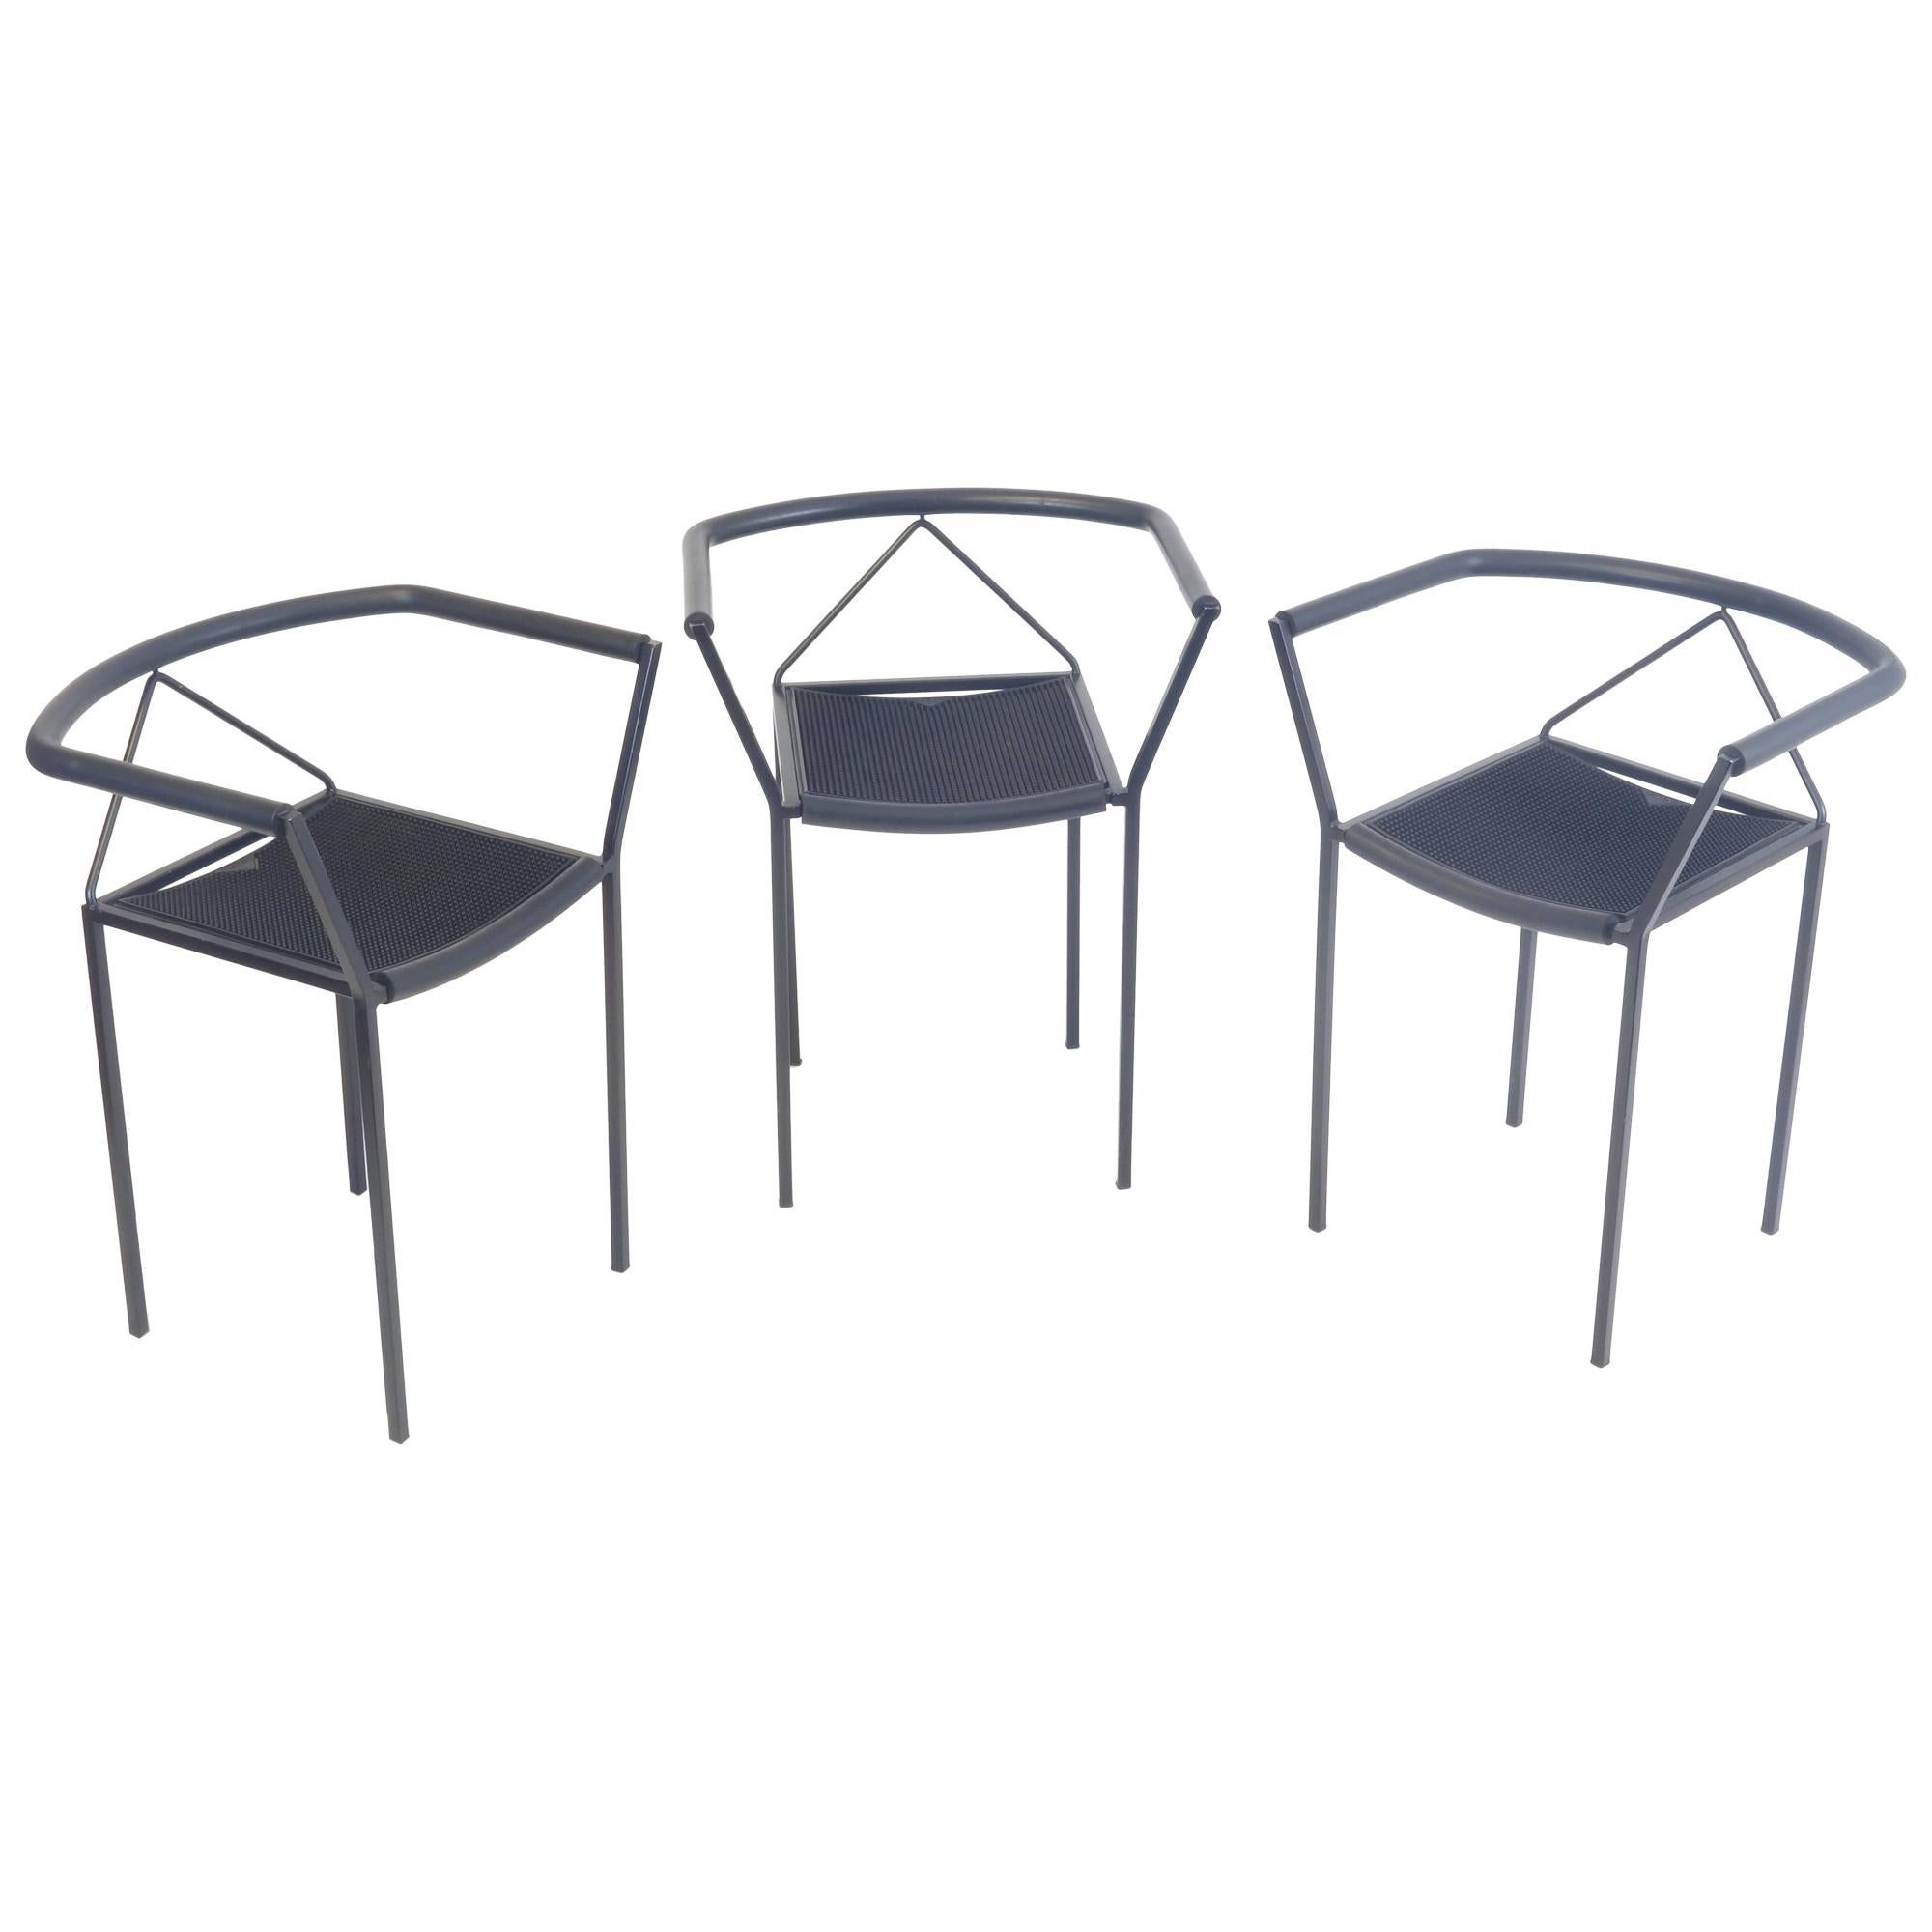 Postmodern Poltroncine Chairs by Zeus in Black Steel Italy Memphis Design Style